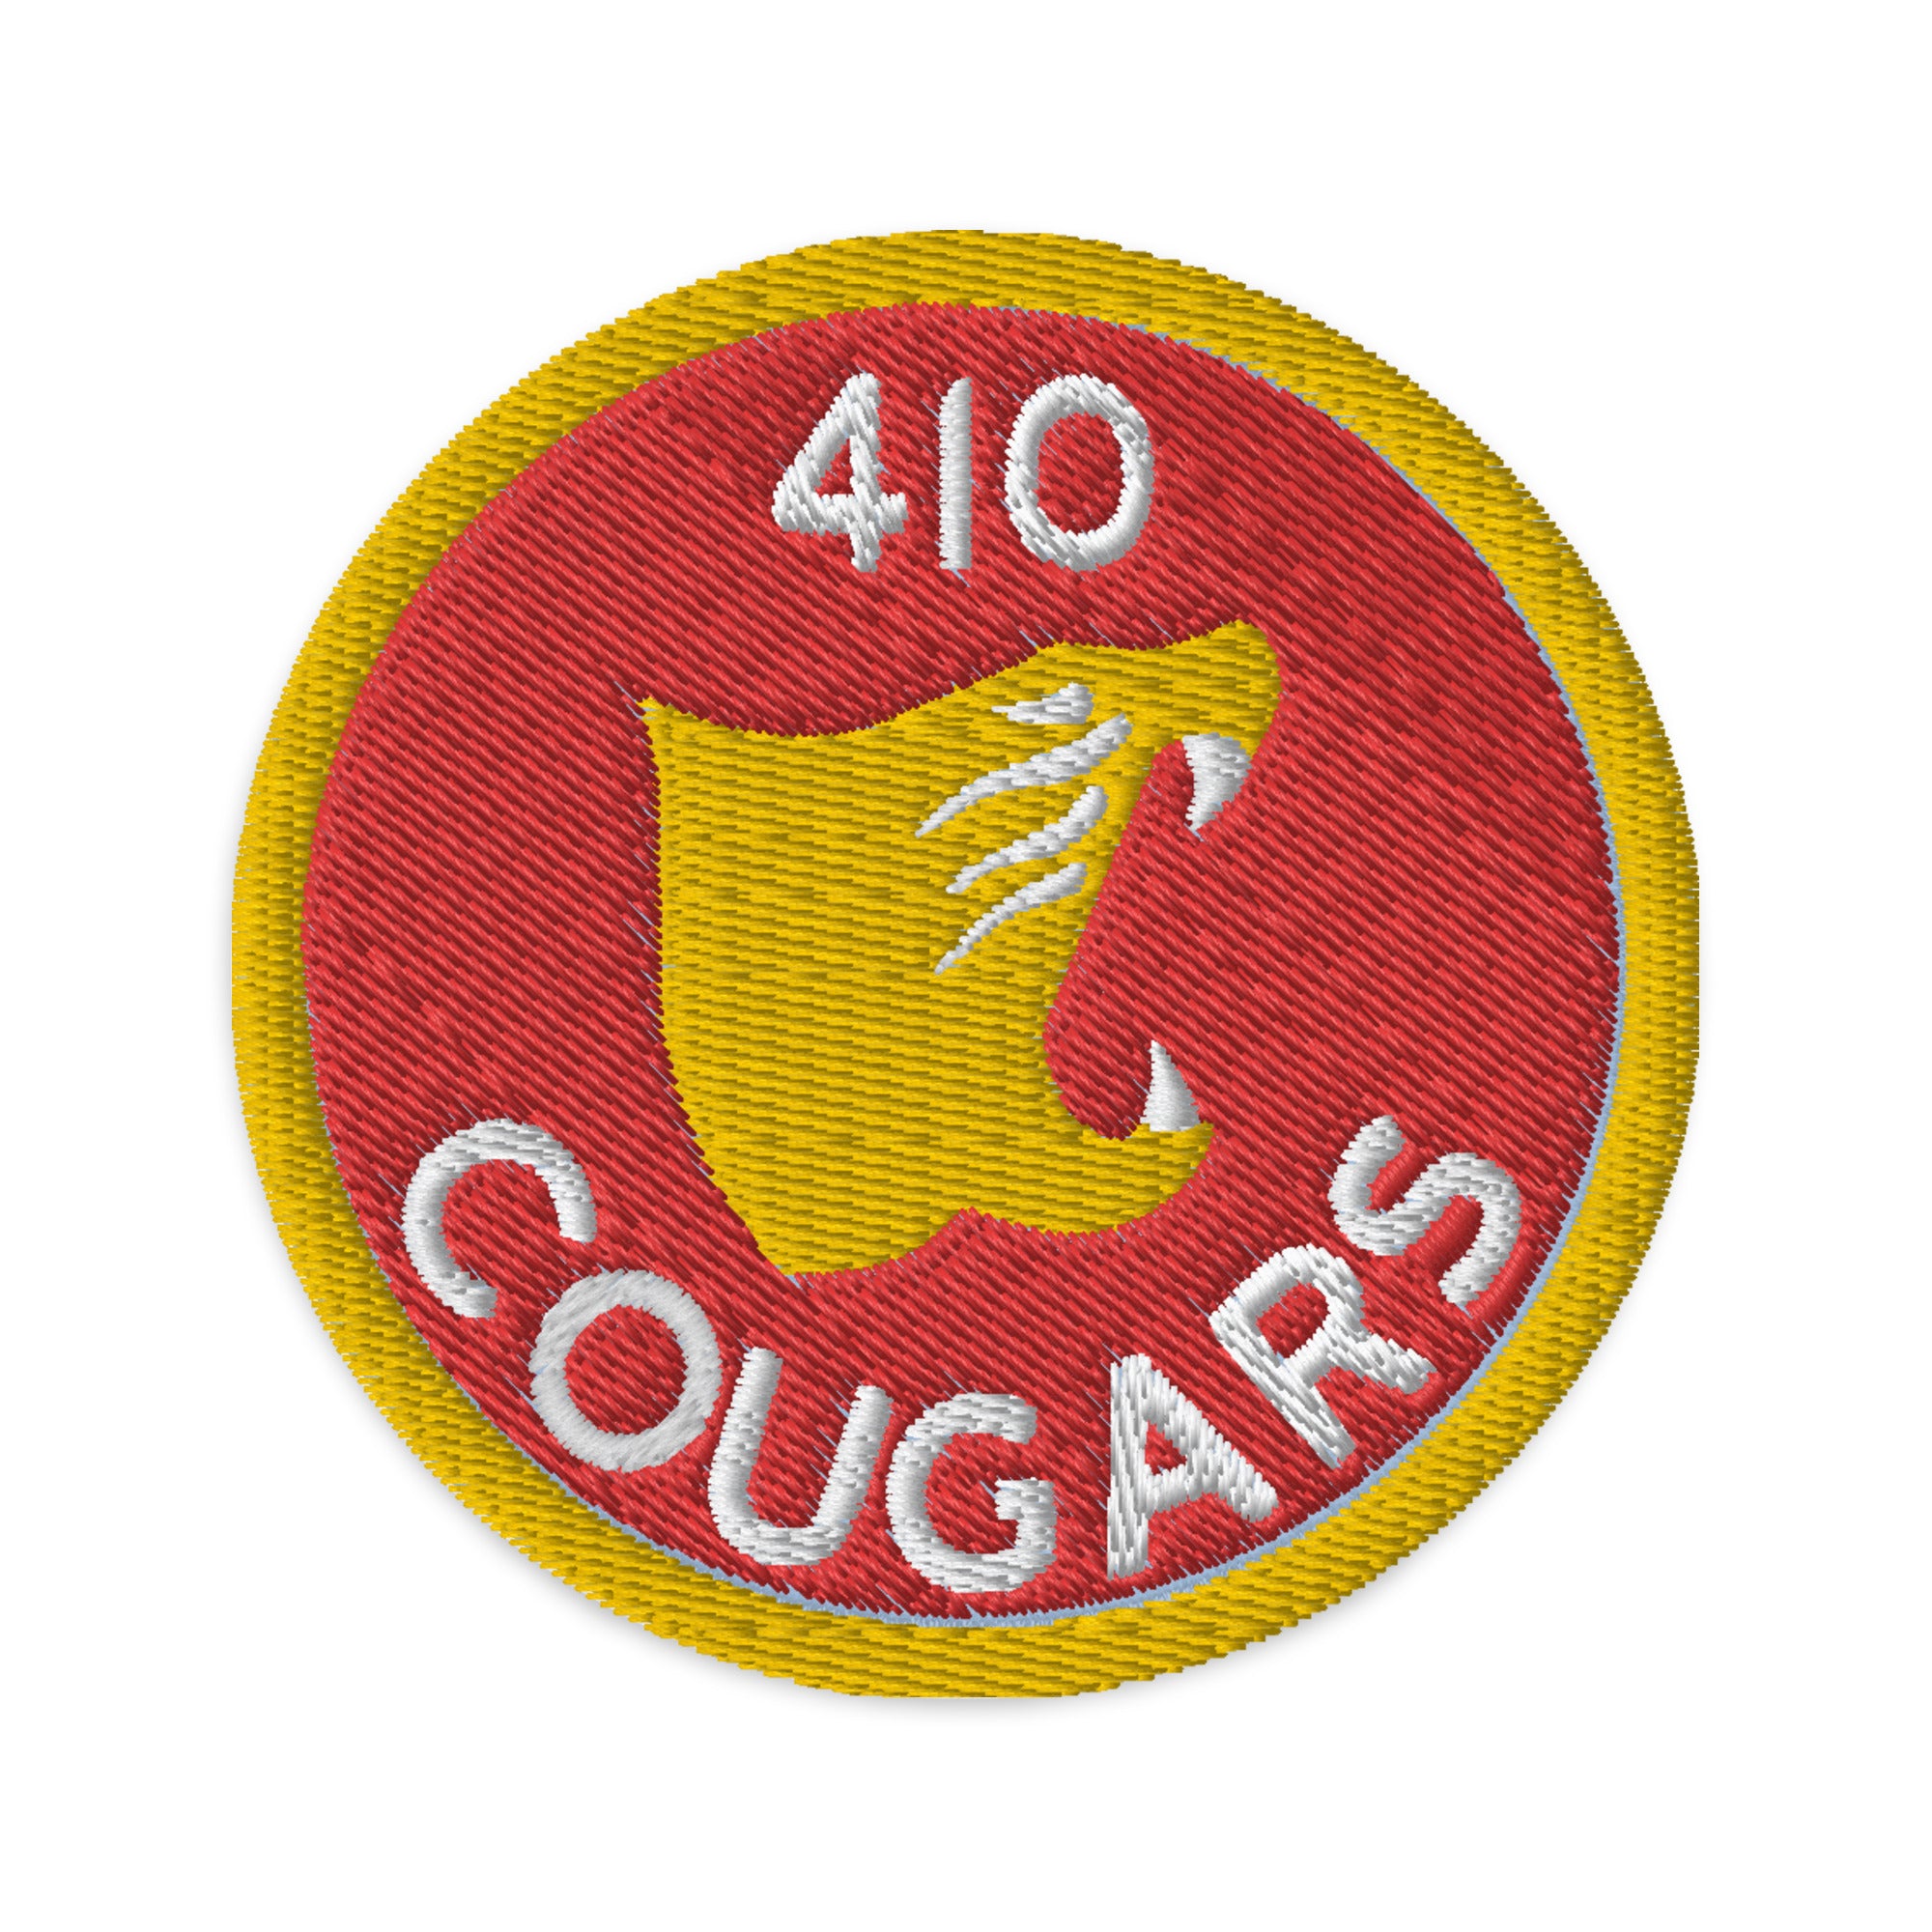 410 SQN RCAF Embroidered patches - I Love a Hangar